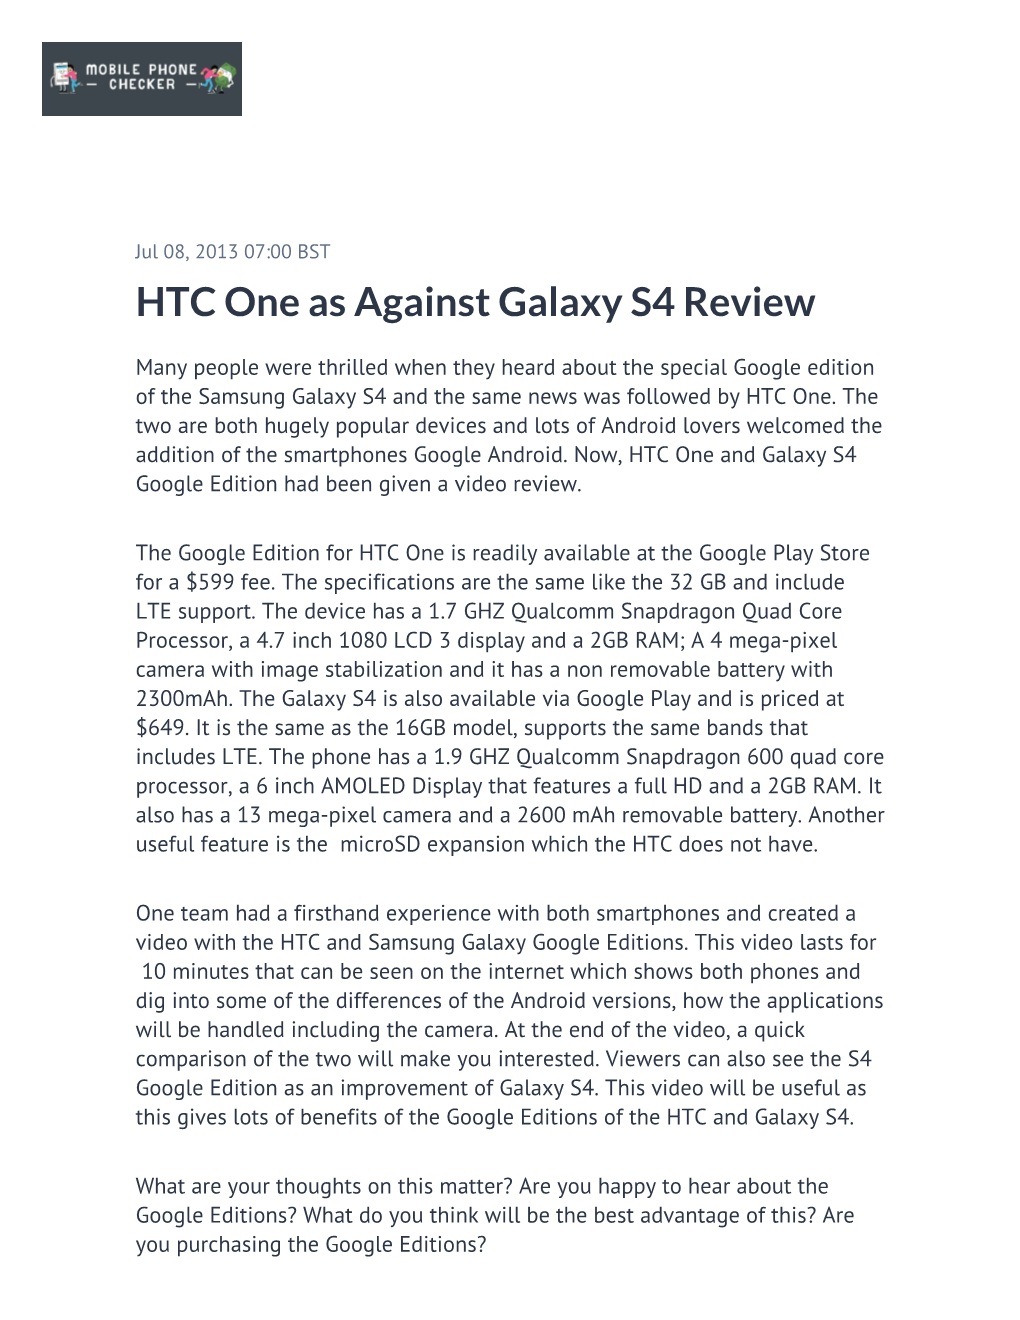 HTC One As Against Galaxy S4 Review